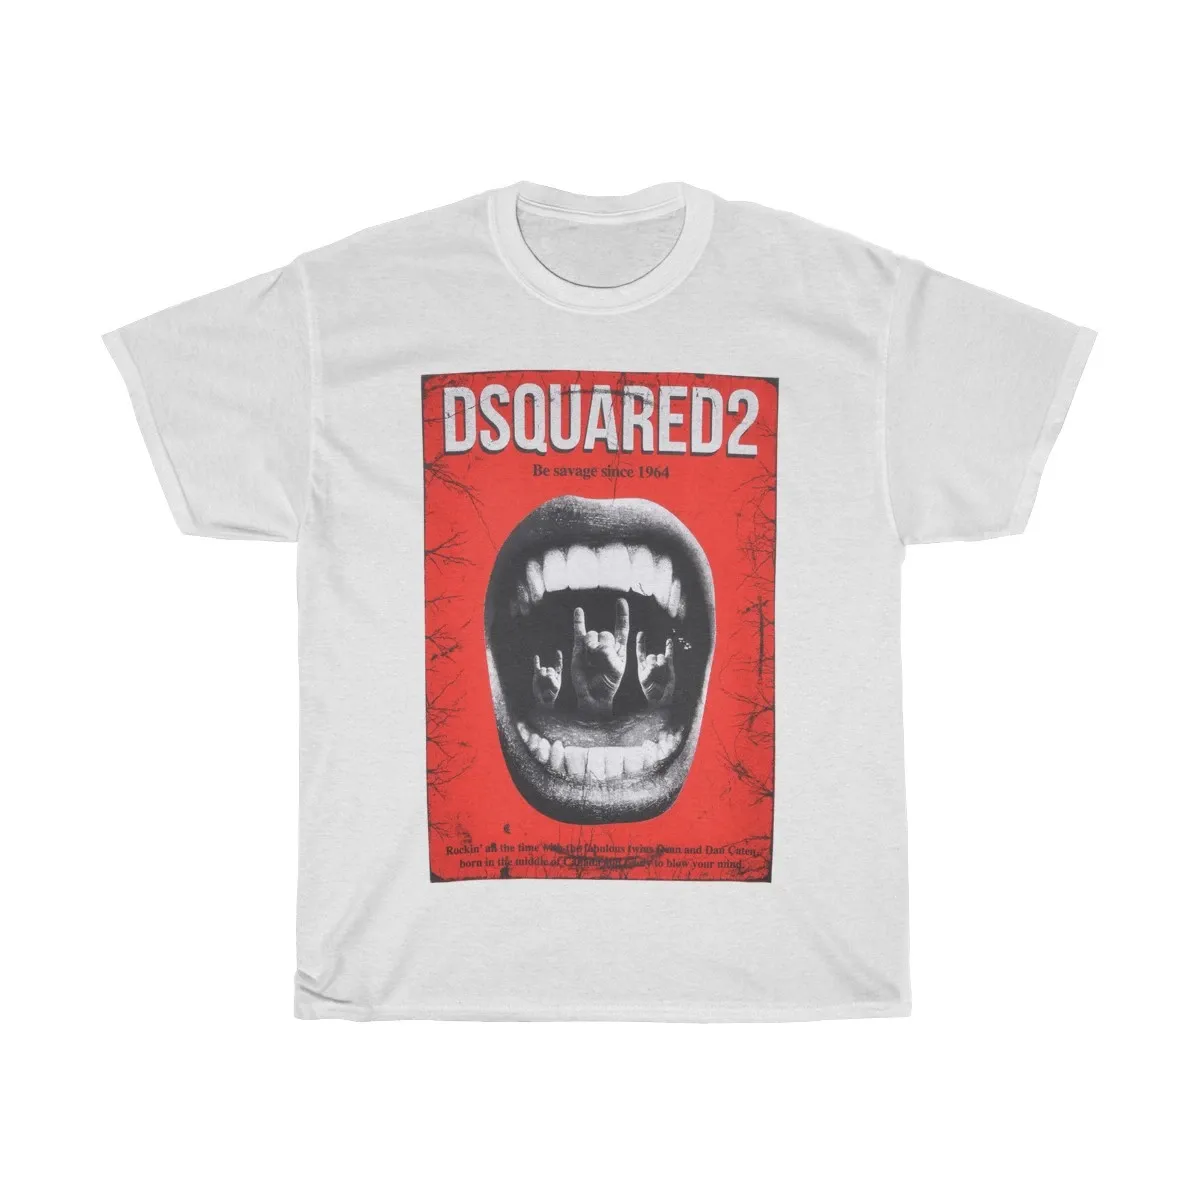 Dsquared2 Be Savage Since 1964 Shirt